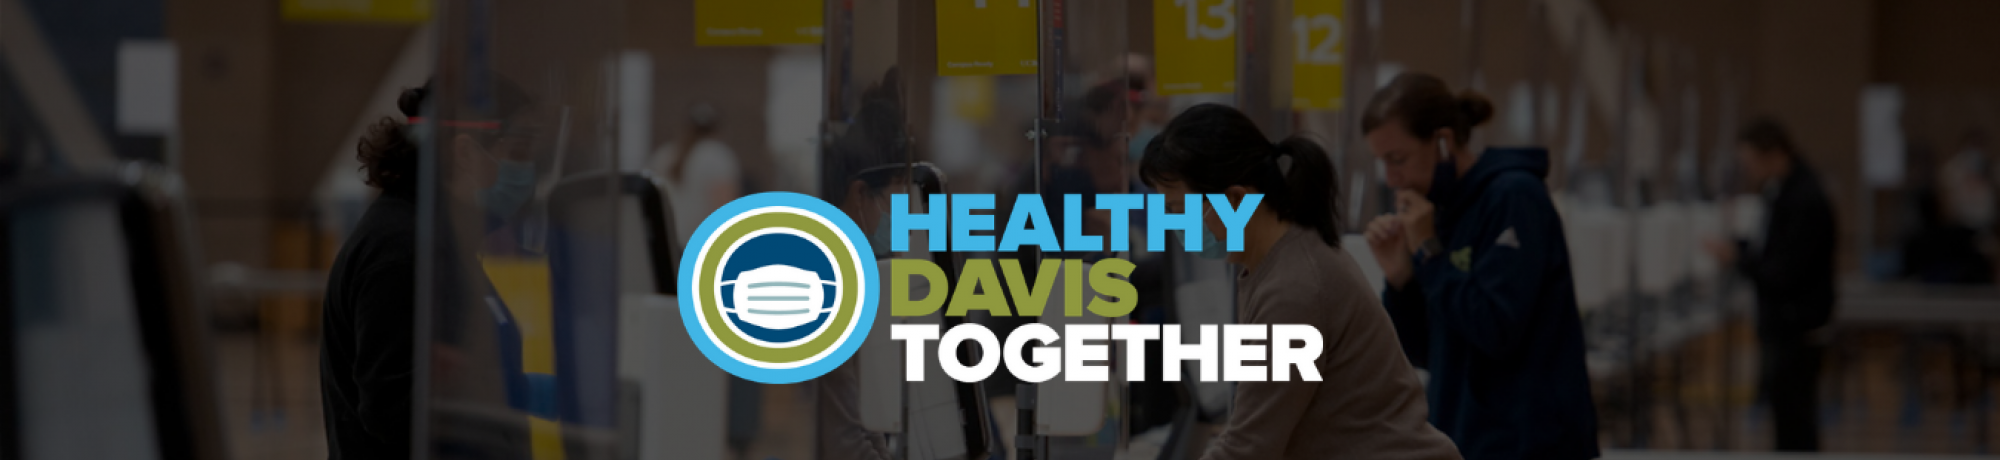 Image with COVID-19 testing and "Healthy Davis Together" logo